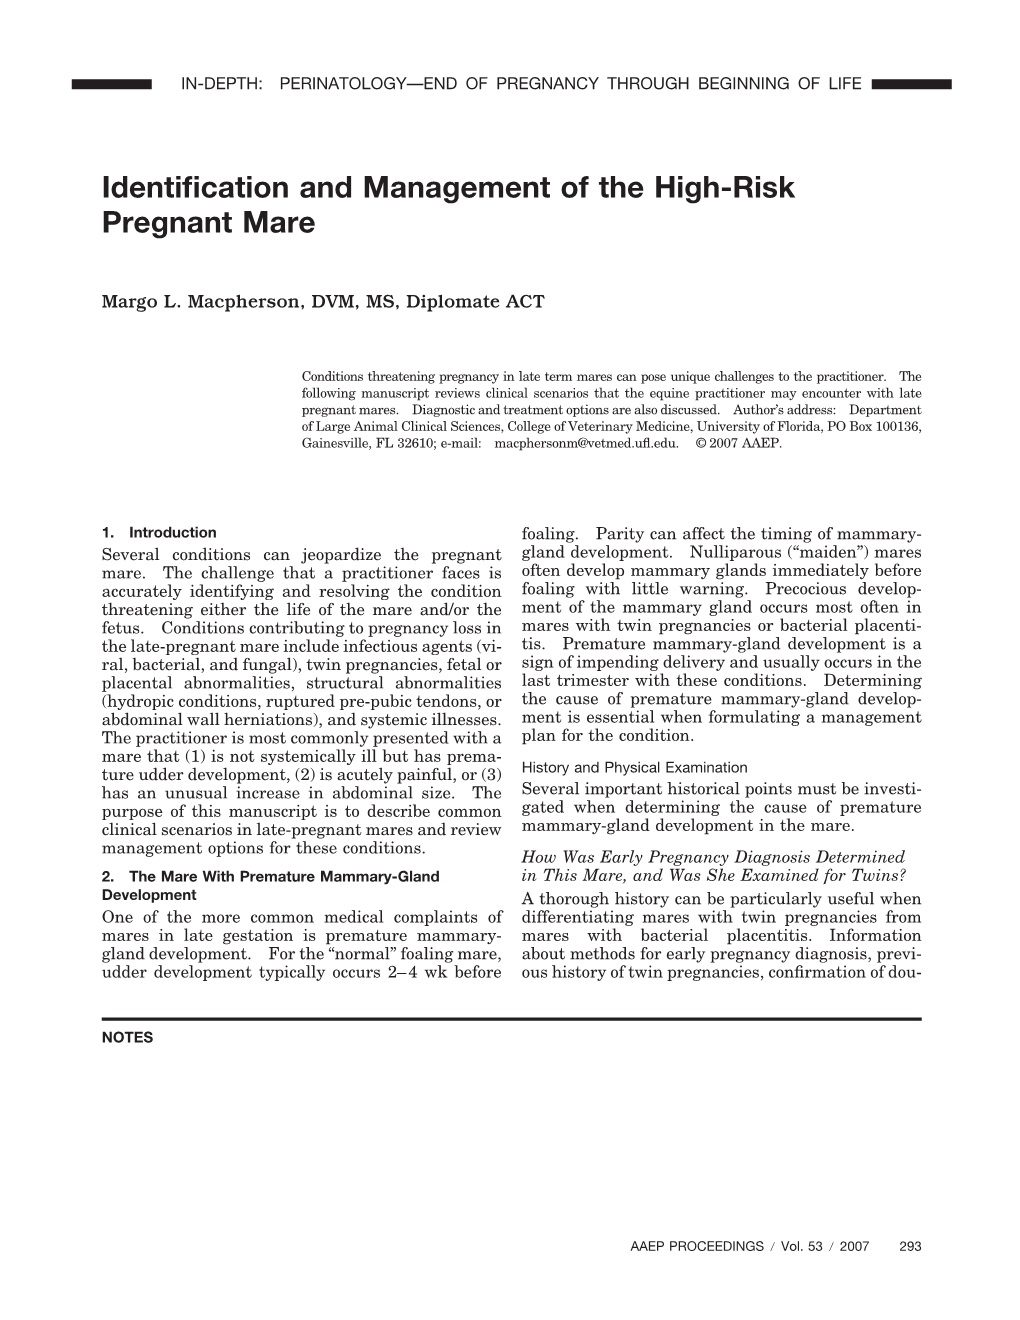 Identification and Management of the High-Risk Pregnant Mare